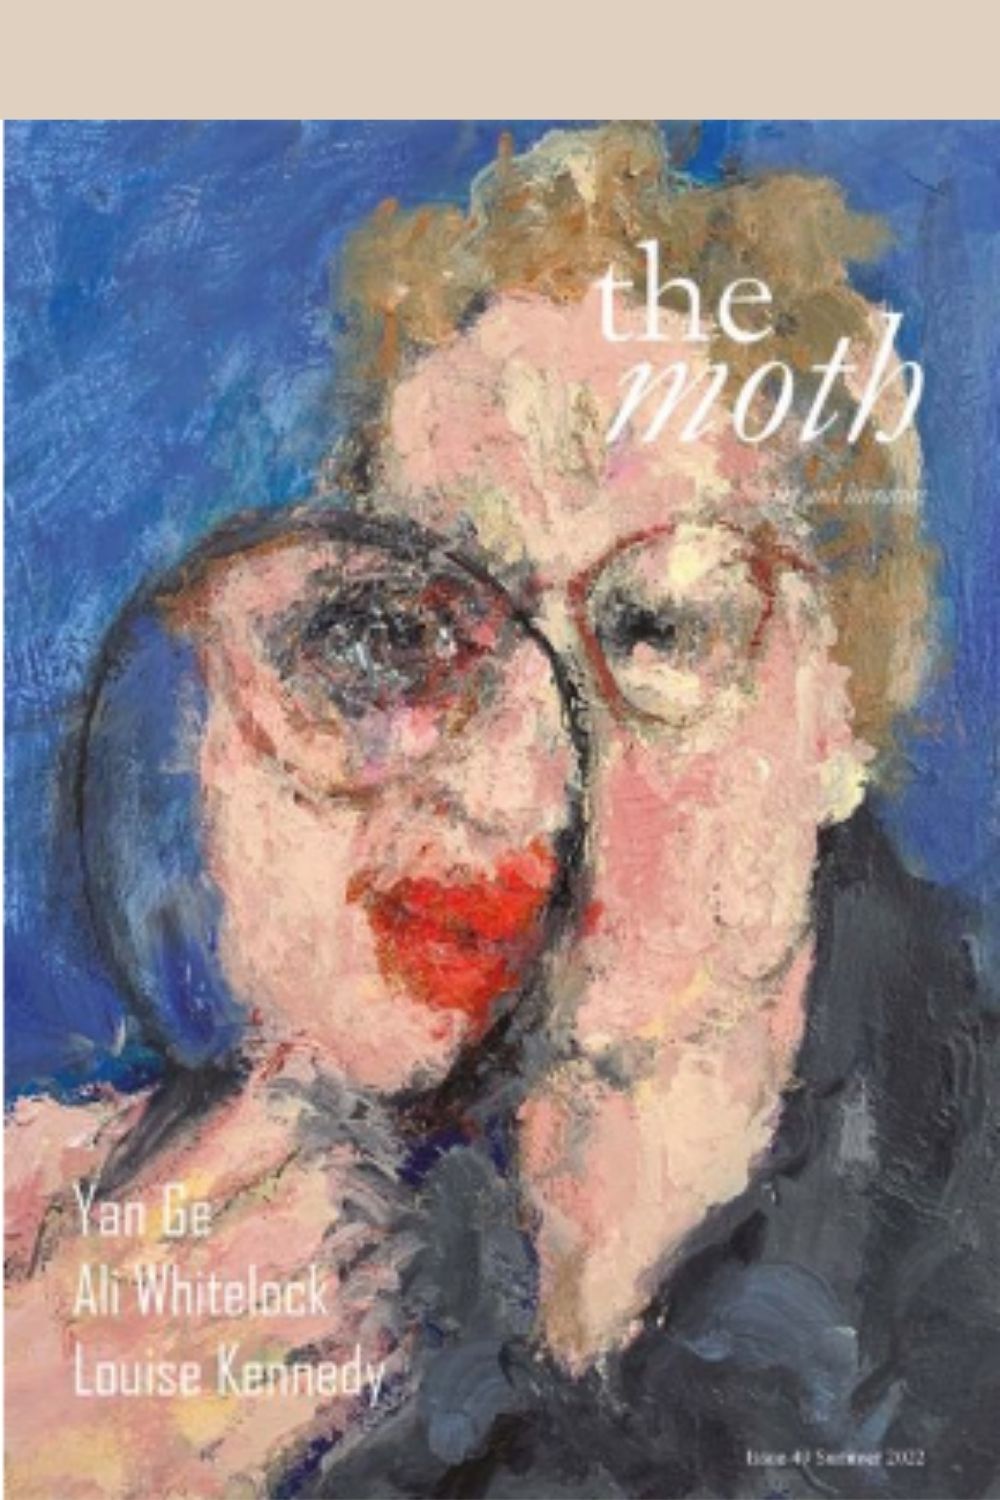 The Moth Issue 49